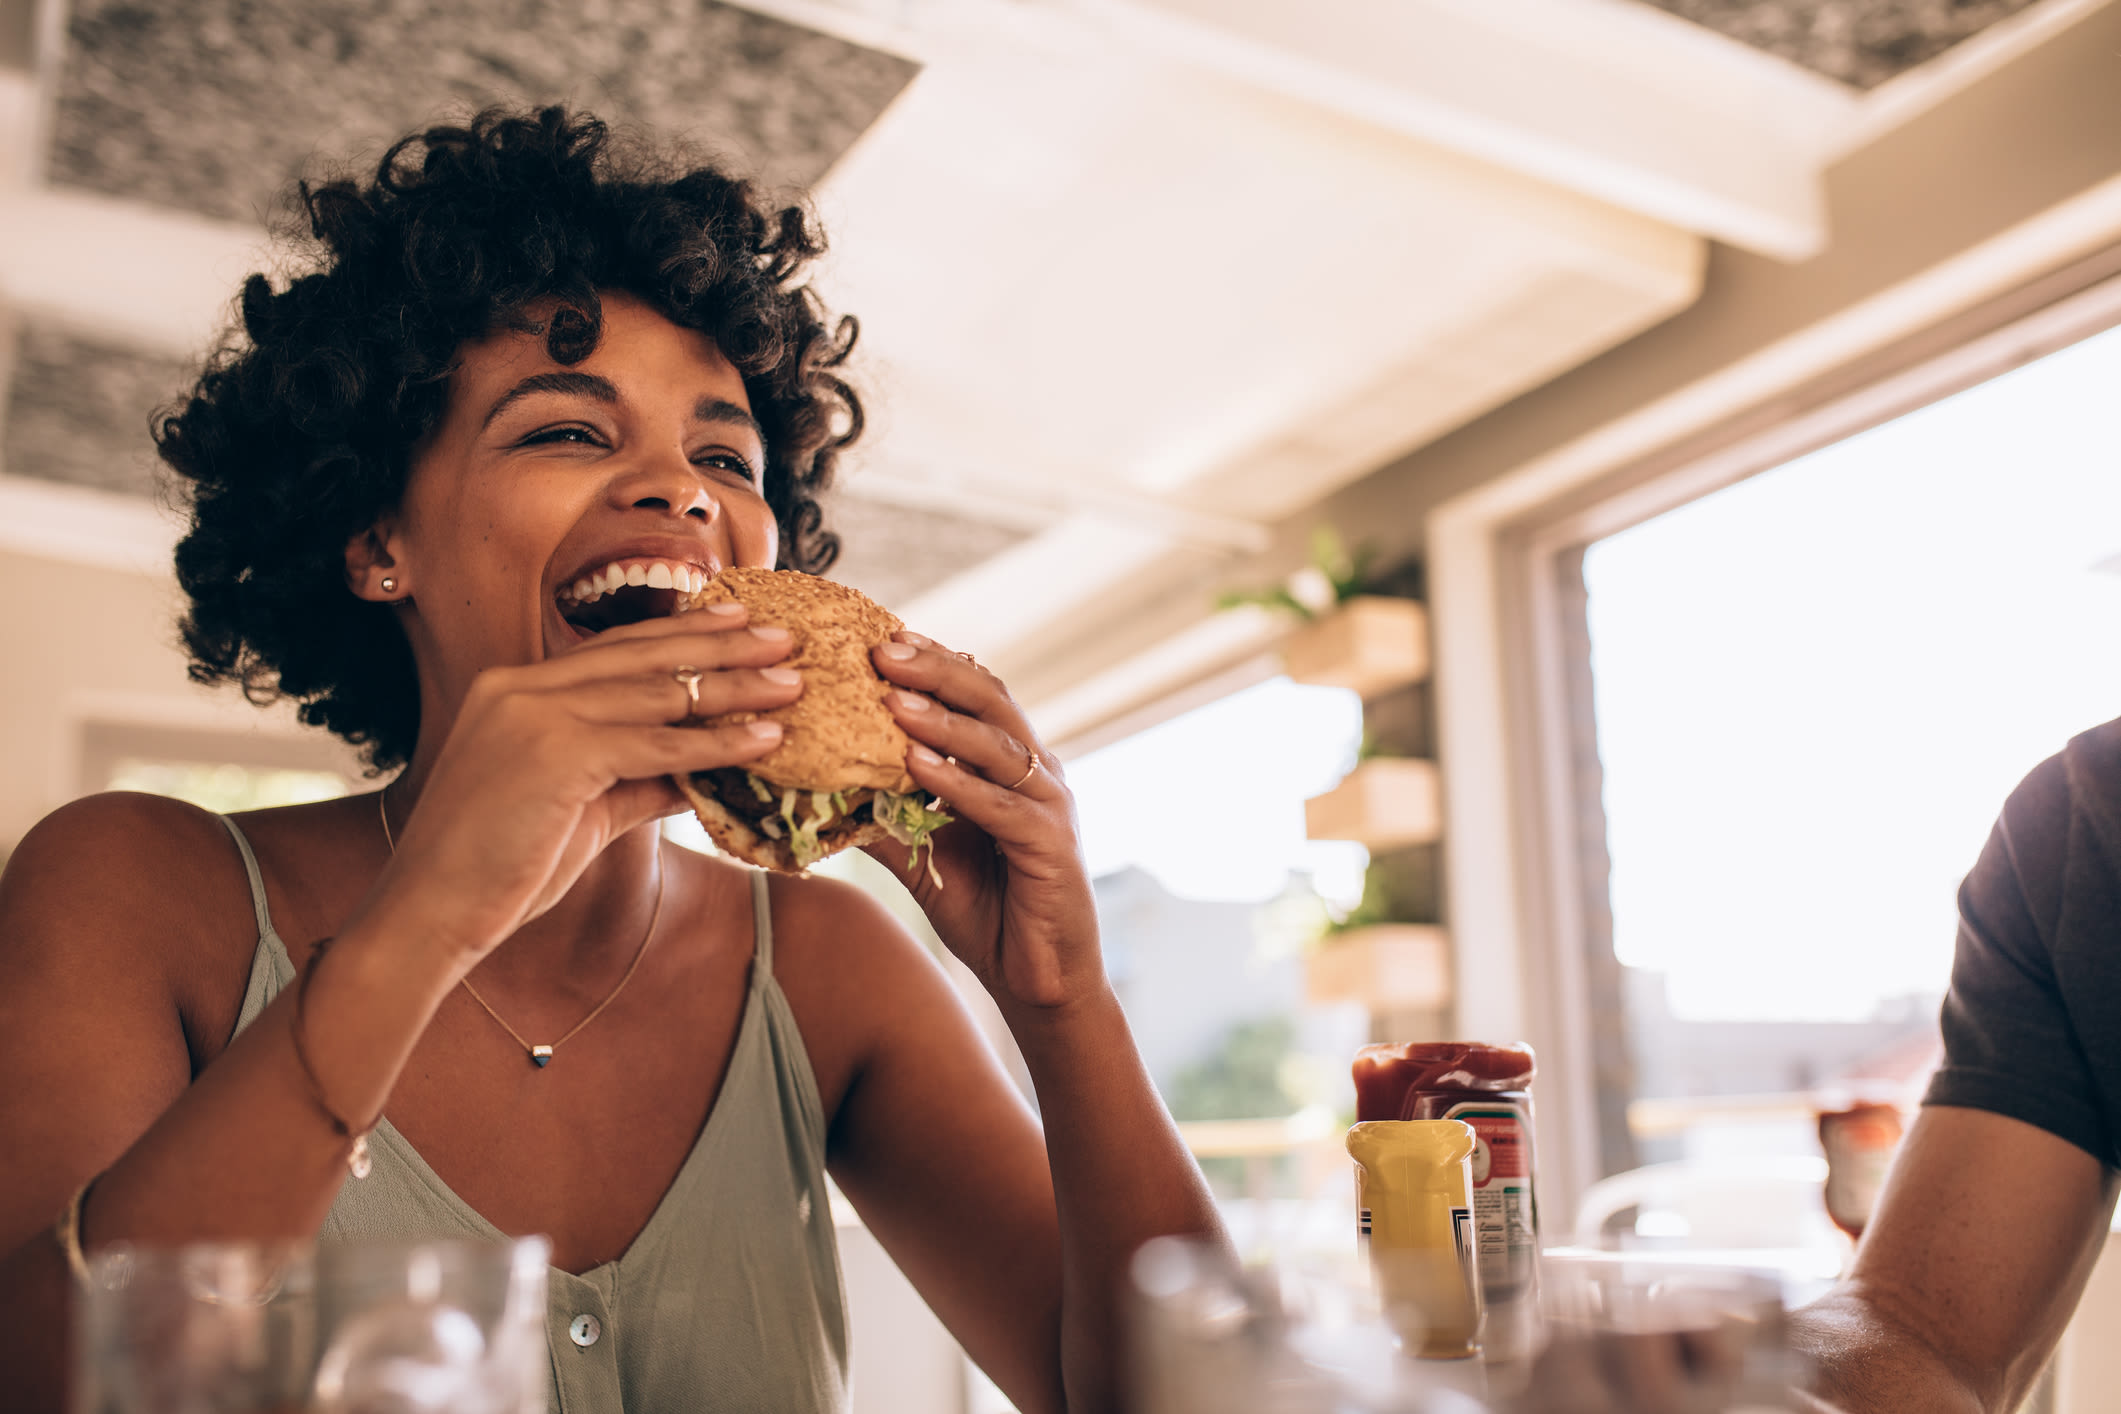 Resident eating a burger with friends at a local restaurant near Iron Ridge in Elkton, Maryland